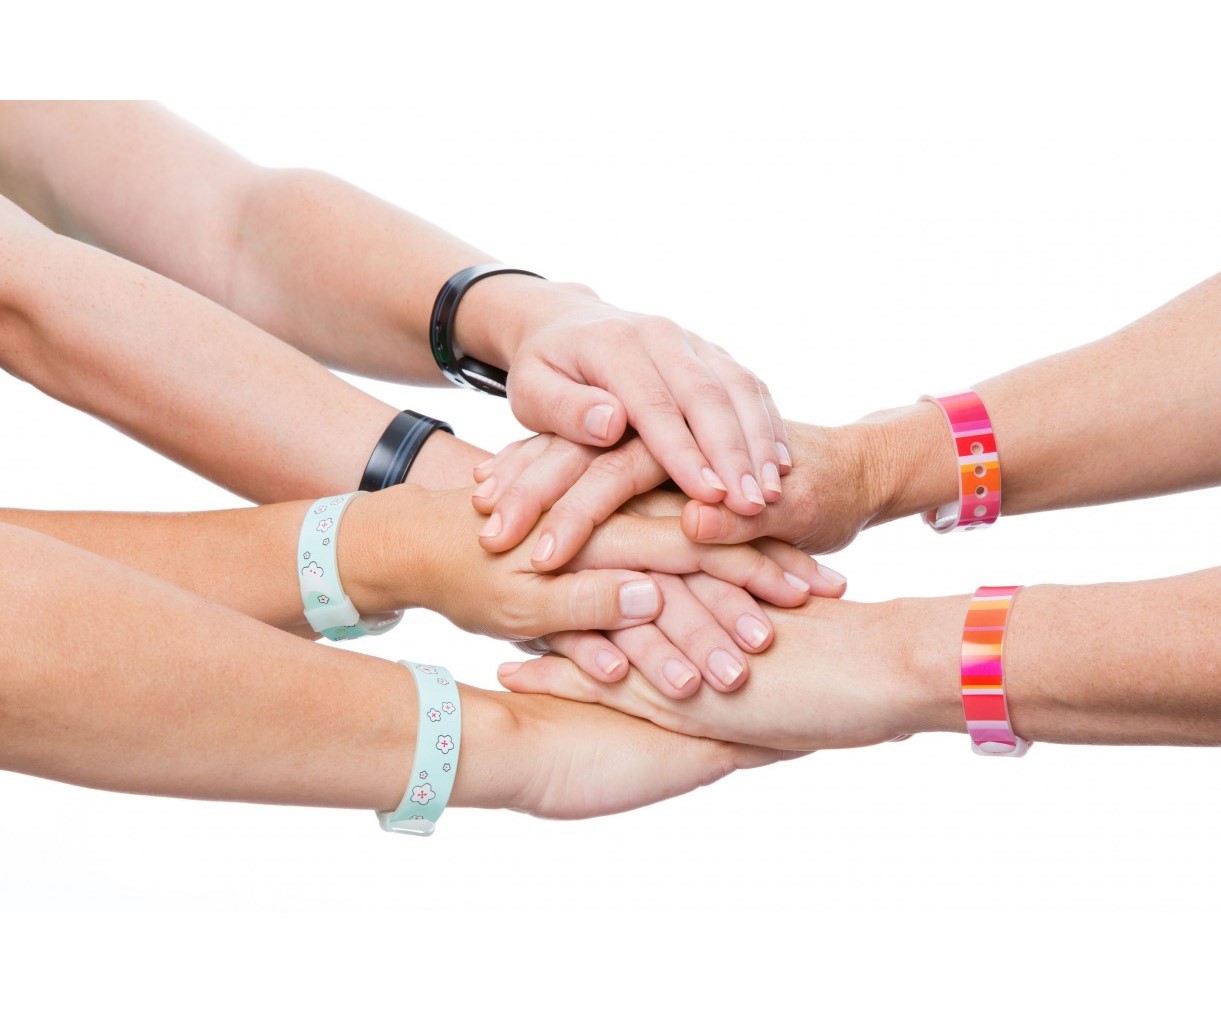 Hands all in together each wearing different colors of Psi Bands